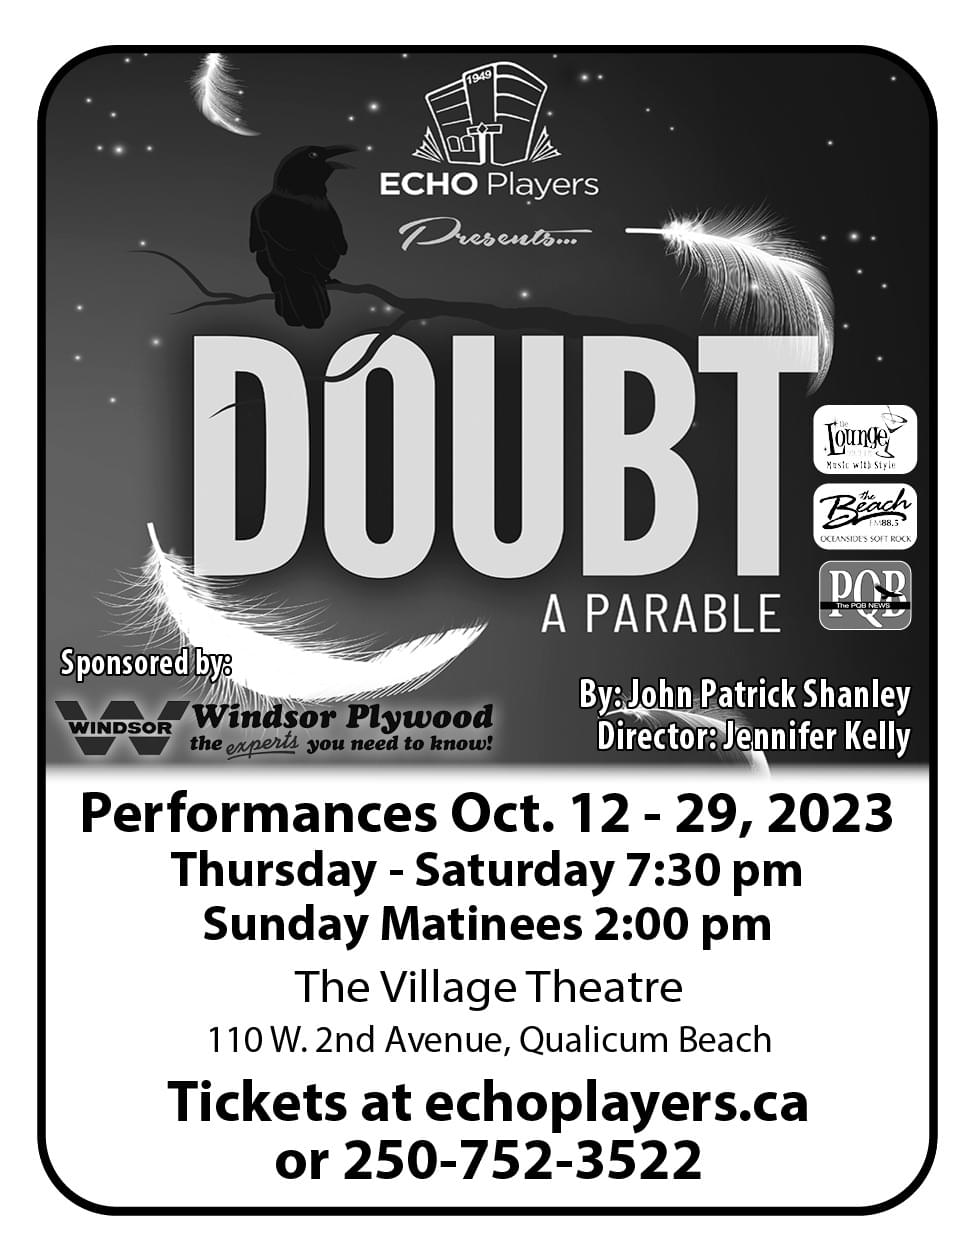 Echo Players presents Doubt September Ad in Coffee News